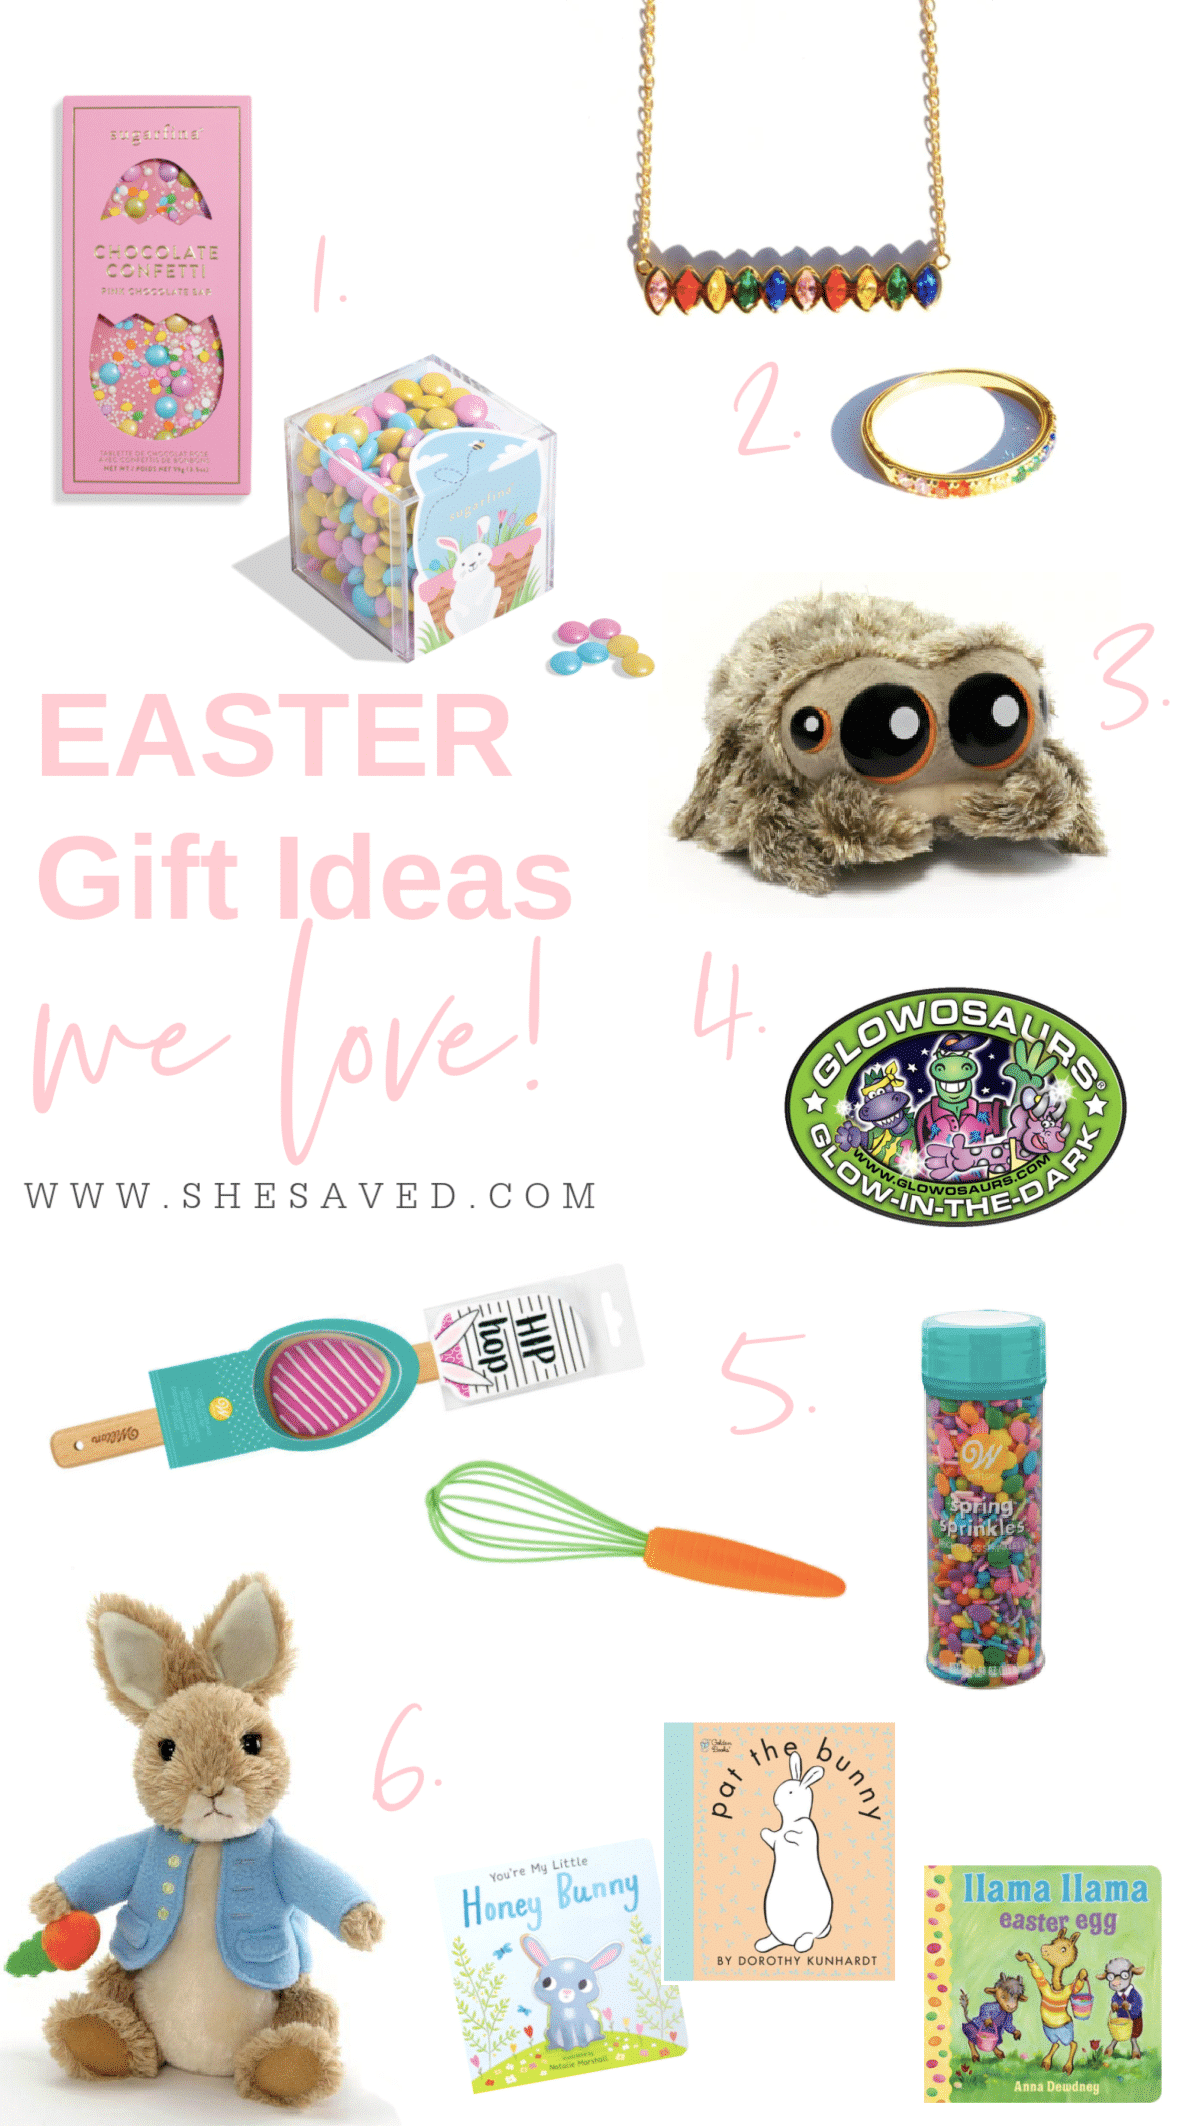 A collection of Easter basket gift ideas for kids